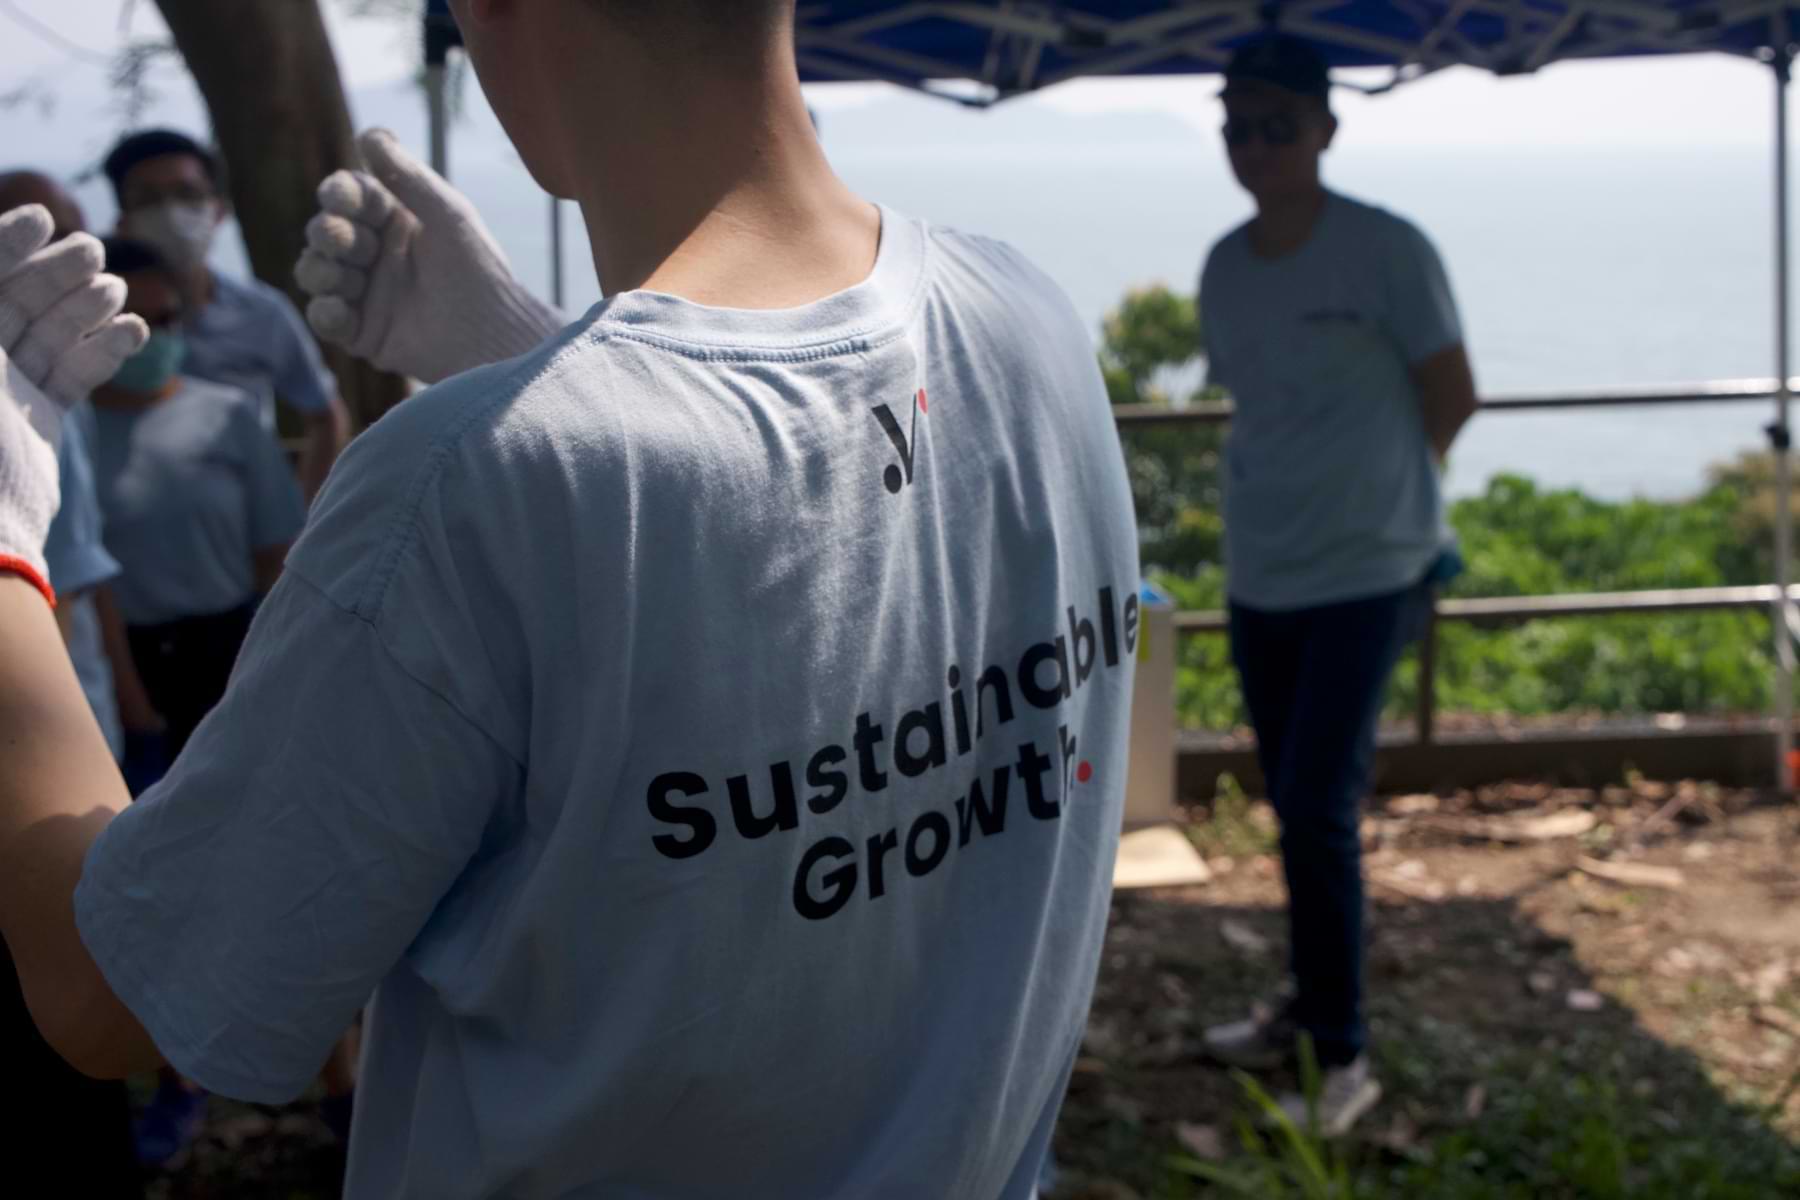 Closeup shot of Velotrade team member wearing a tee with logo and tagline "Sustainable Growth".